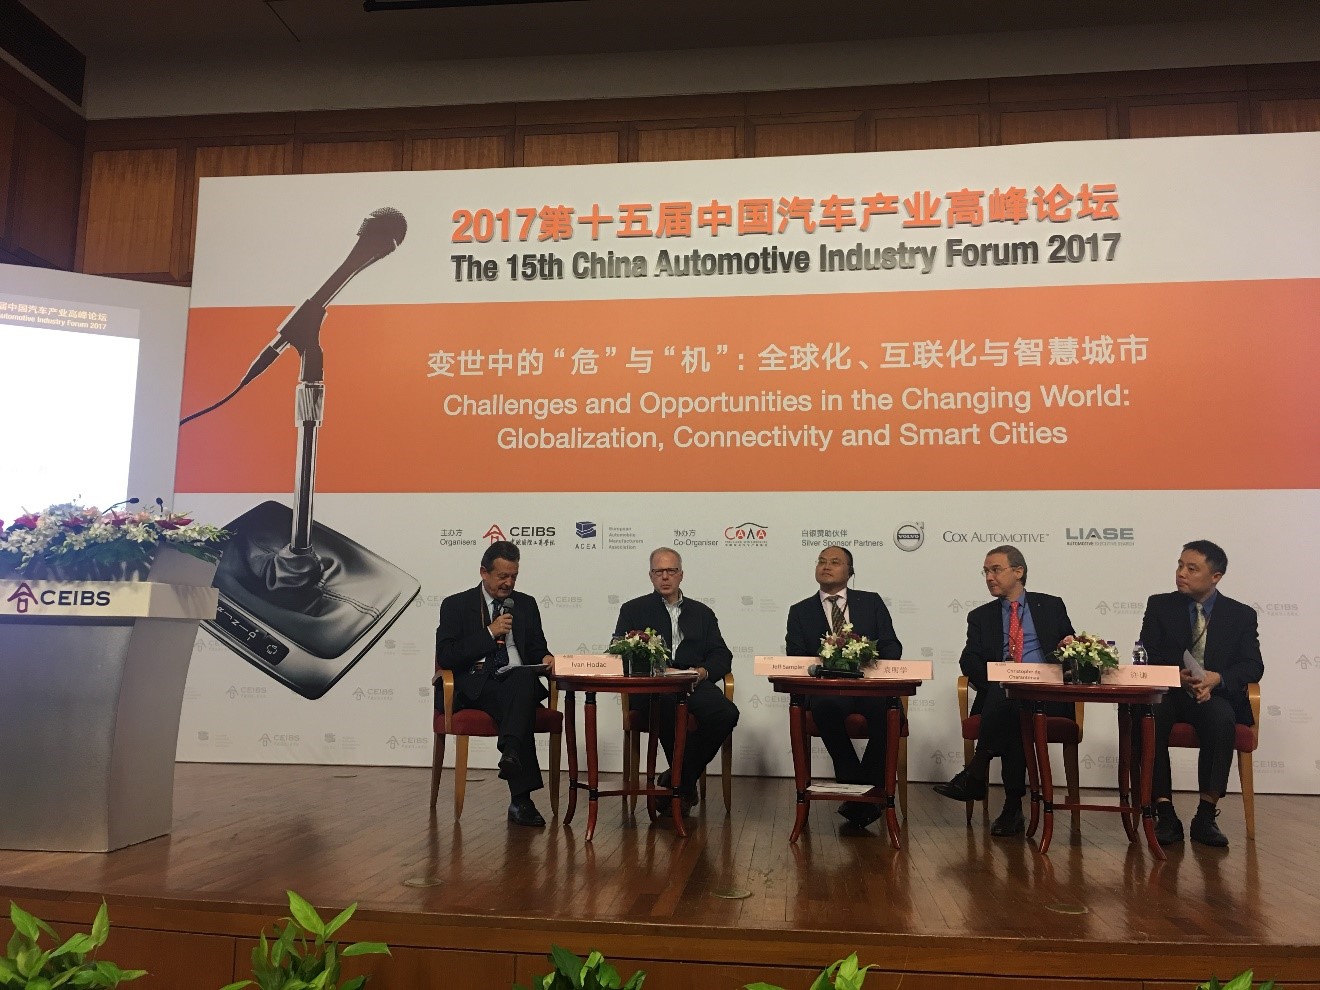 Left to right: Mr. Ivan Hodac, Founder and President, Aspen Institute Prague; Mr. Jeffrey Sampler, Adjunct Professor of Management, CEIBS; Mr. Yuan Mingxue, Vice President, Changan Automobile; Mr. Christophe de Charantenay, Managing Director, Renault (Beijing) Automotive Co. Ltd., Vice President, Chinese Business Office of Renault China; Mr. Xu Qian, Director of AlixPartners, Head of Automotive Practice for Greater China.